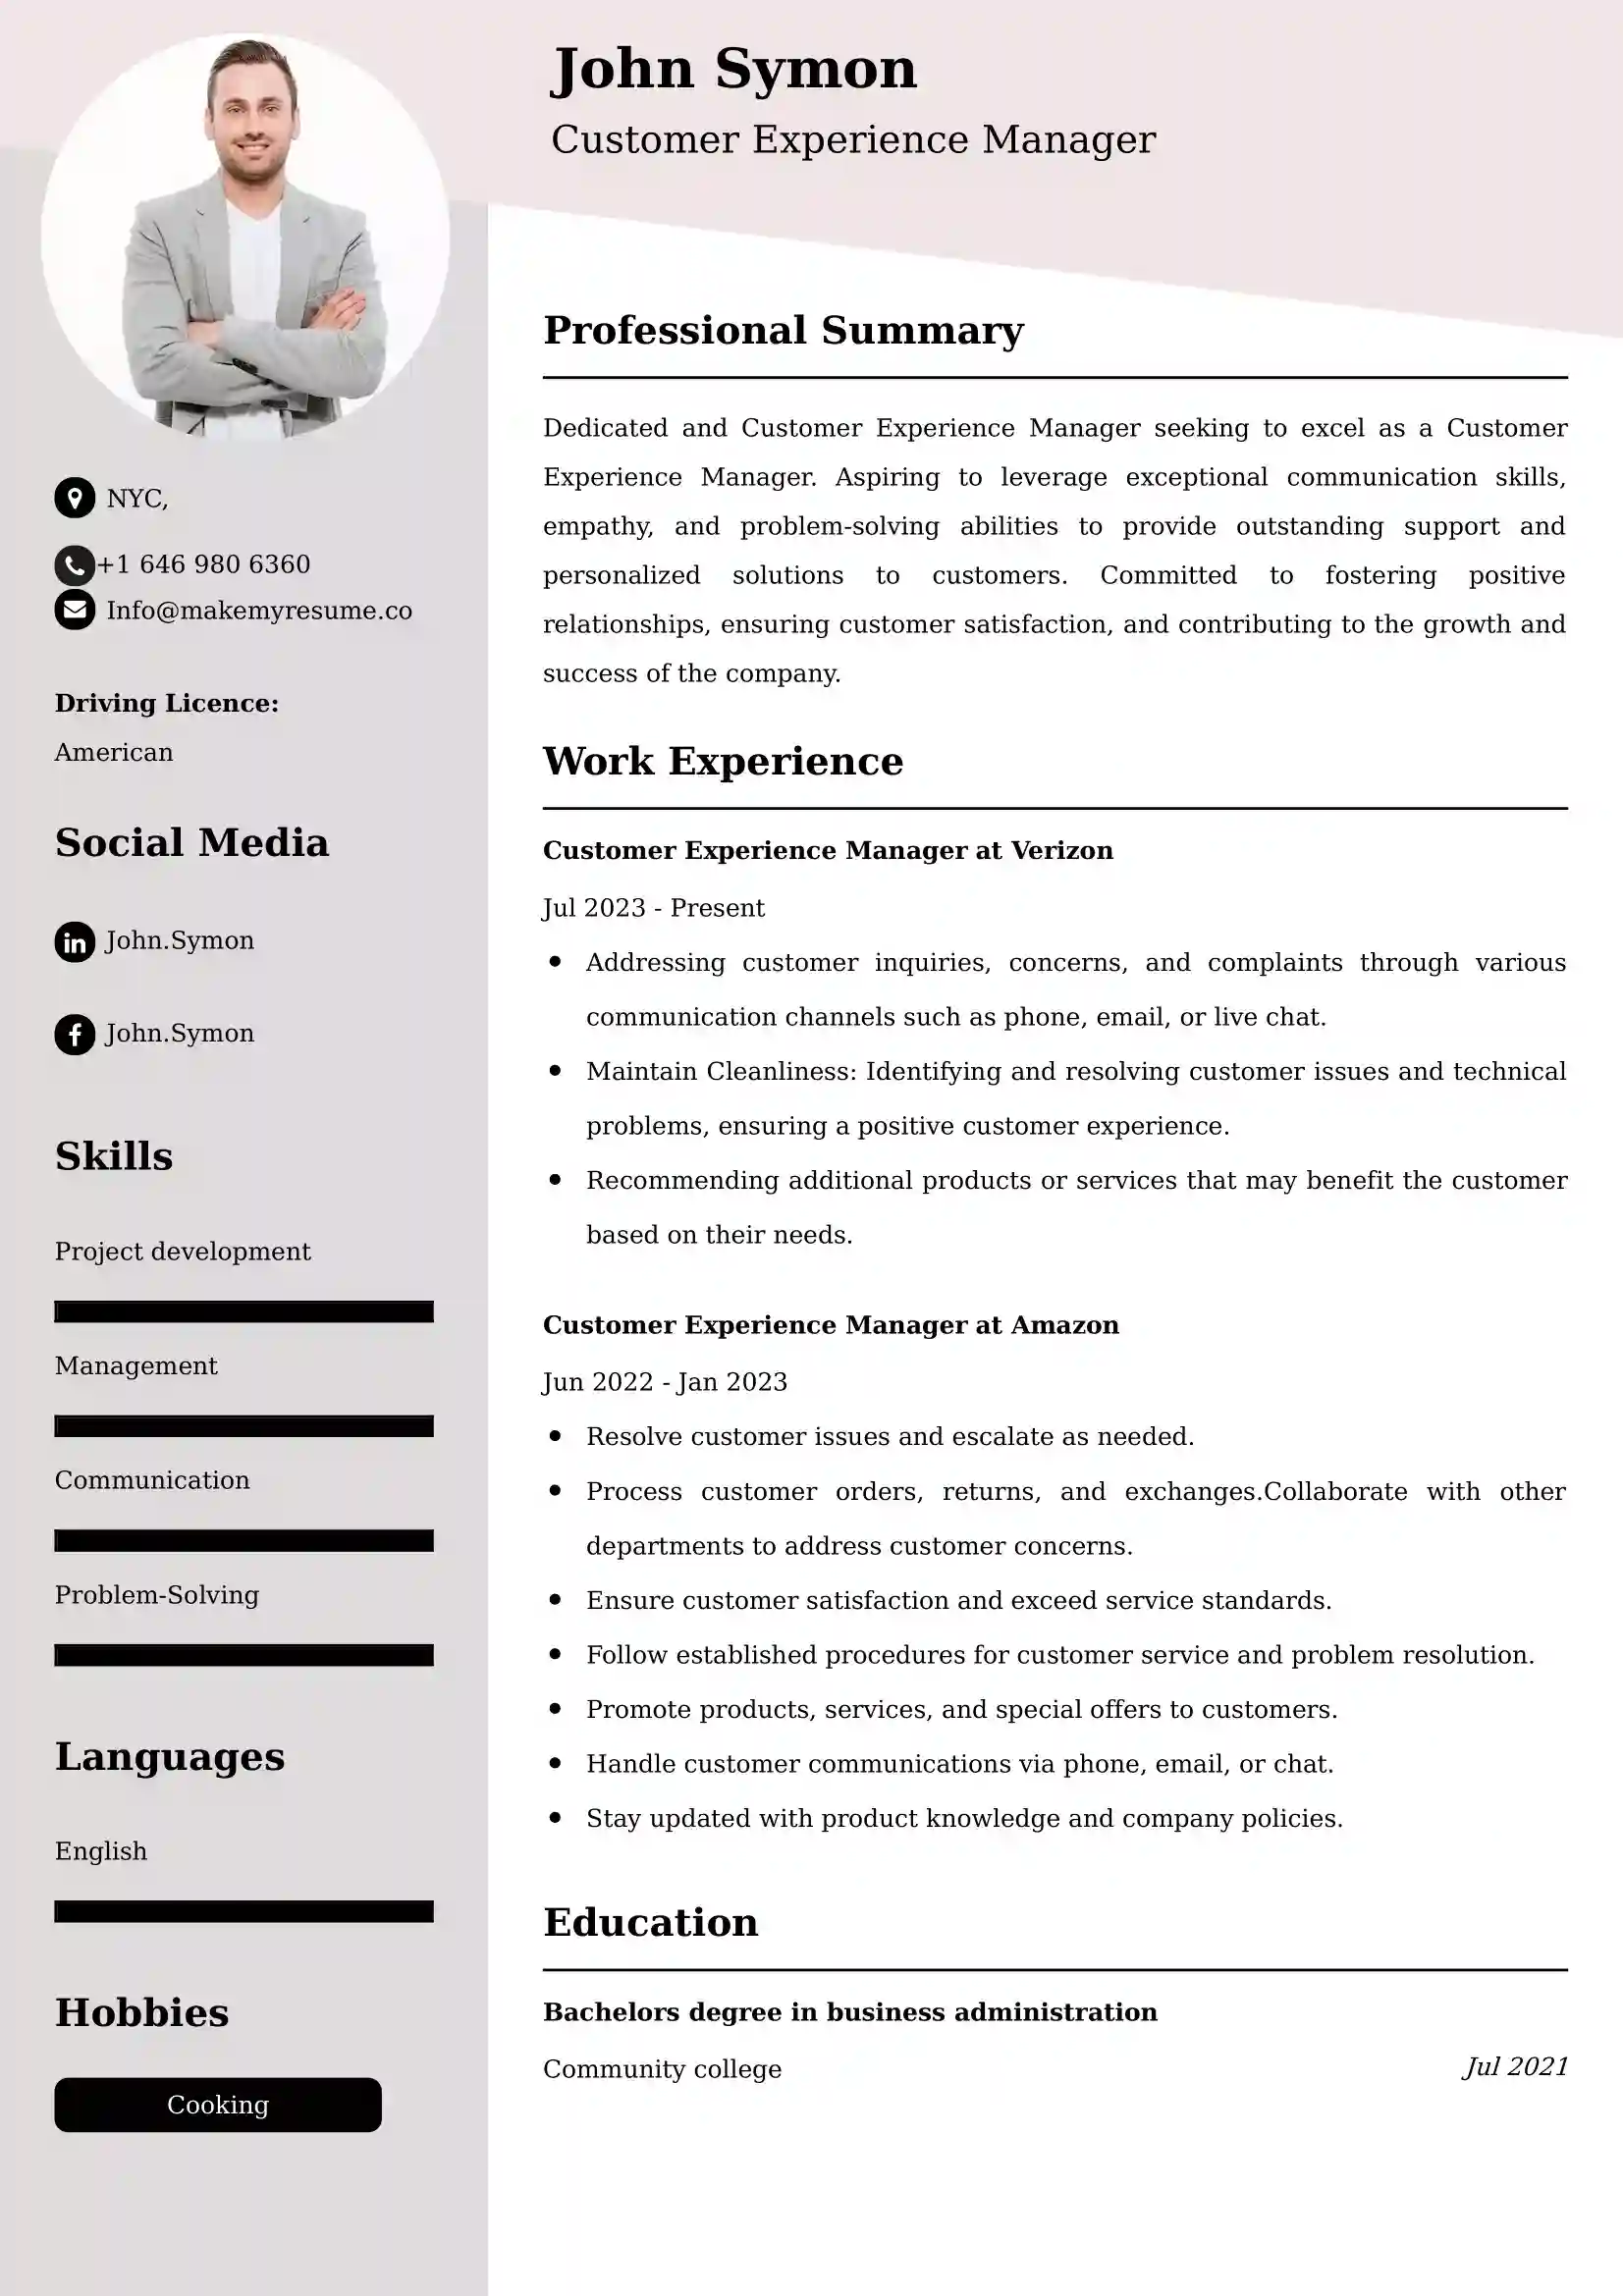 Customer Experience Manager Resume Examples - UK Format, Latest Template.